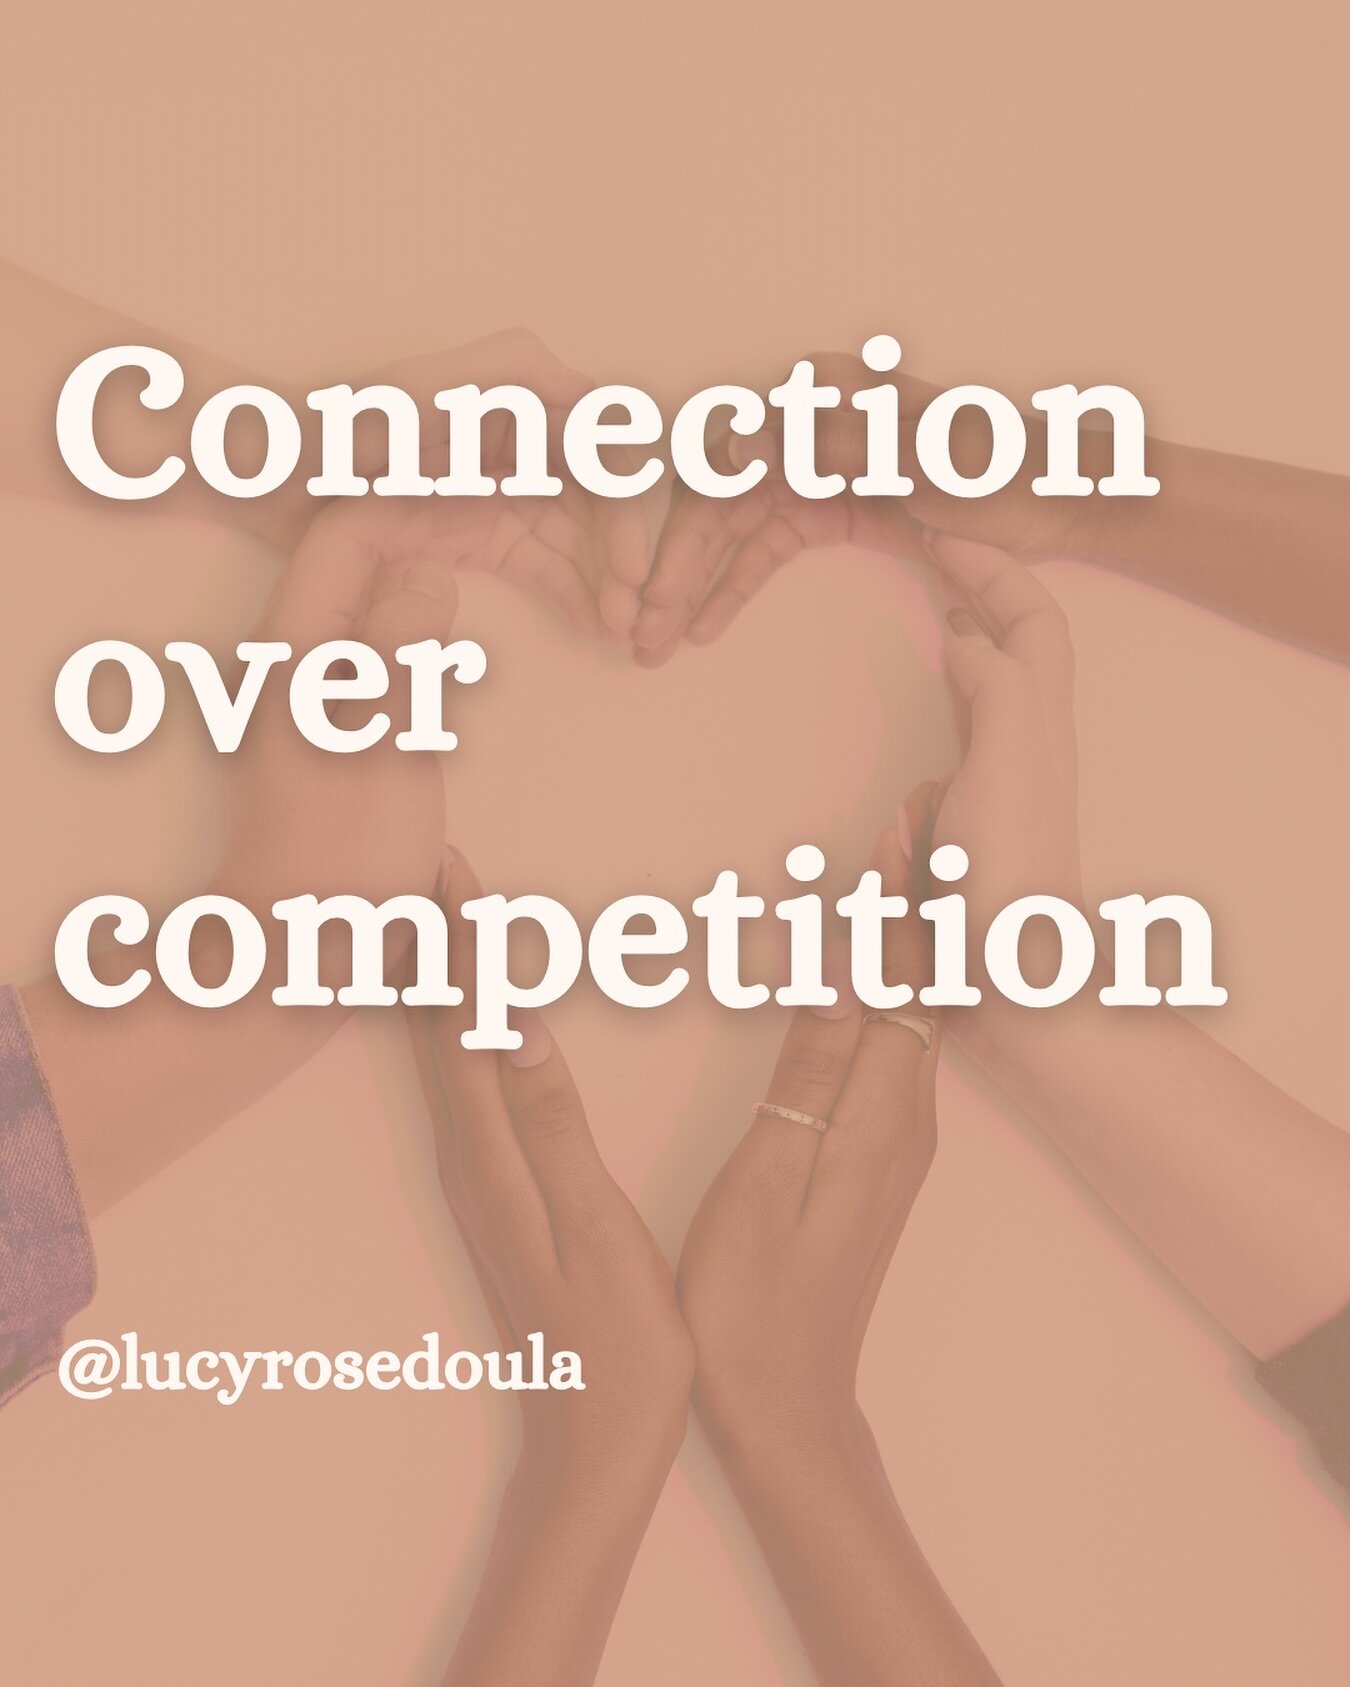 Oof there&rsquo;s so much competition with other women isn&rsquo;t there? Sometimes overt, but often it bubbles under the surface - it&rsquo;s never really said, maybe the other person doesn&rsquo;t even know, but in your head you&rsquo;re competing,